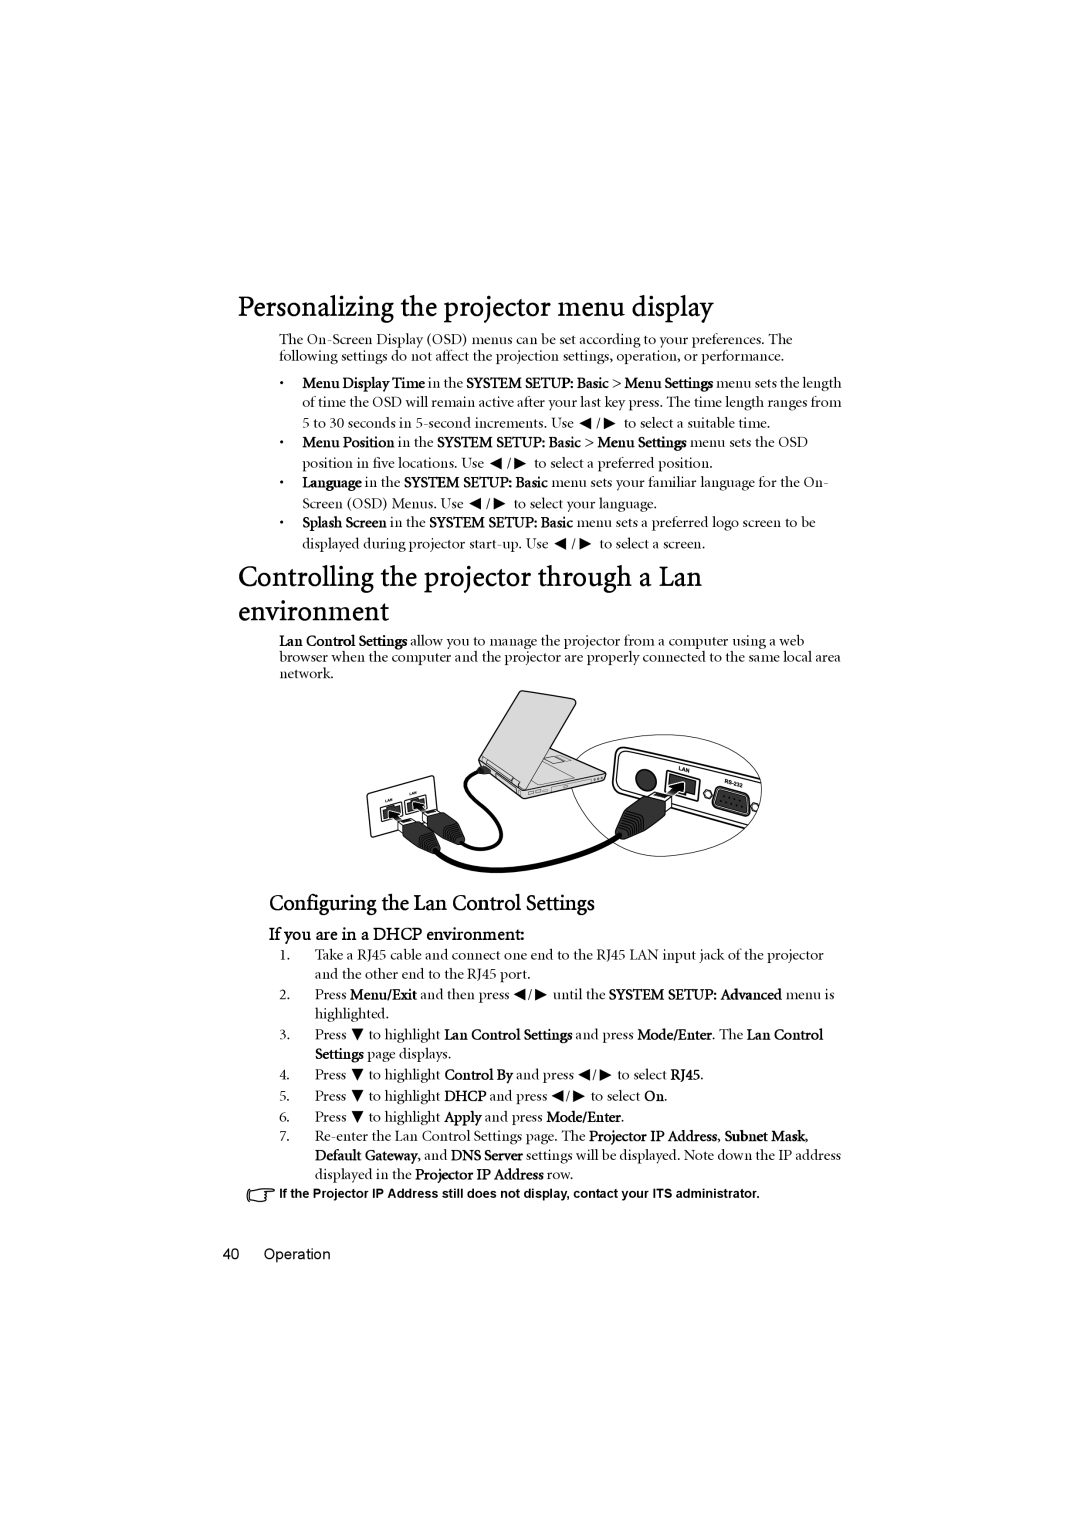 BenQ MP776 ST user manual Personalizing the projector menu display, Controlling the projector through a Lan environment 